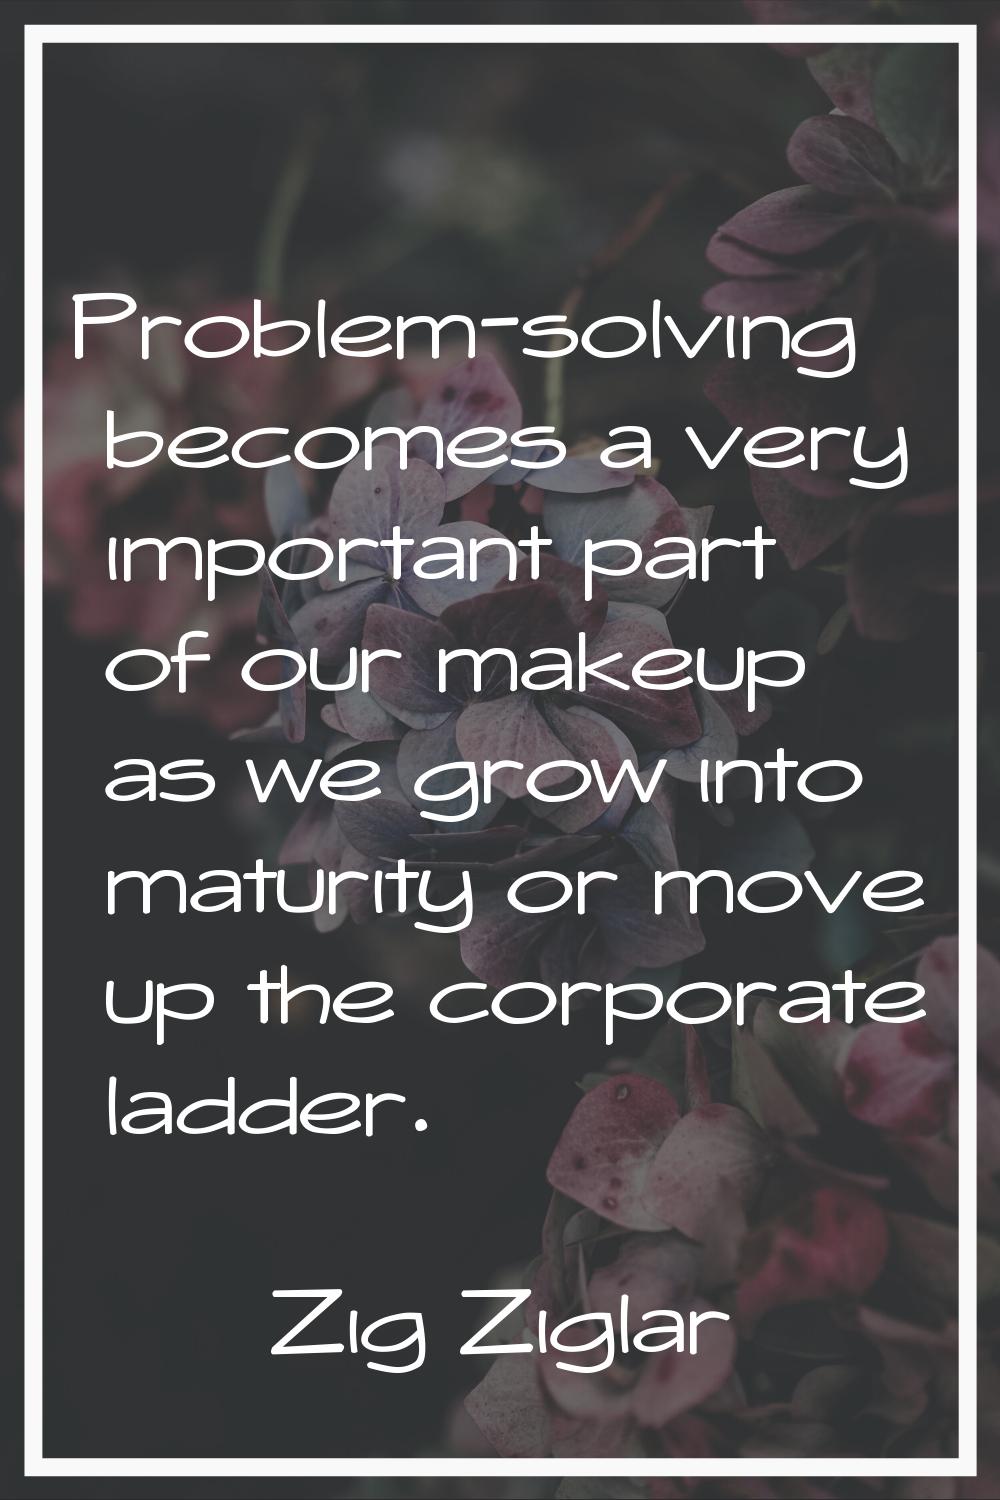 Problem-solving becomes a very important part of our makeup as we grow into maturity or move up the